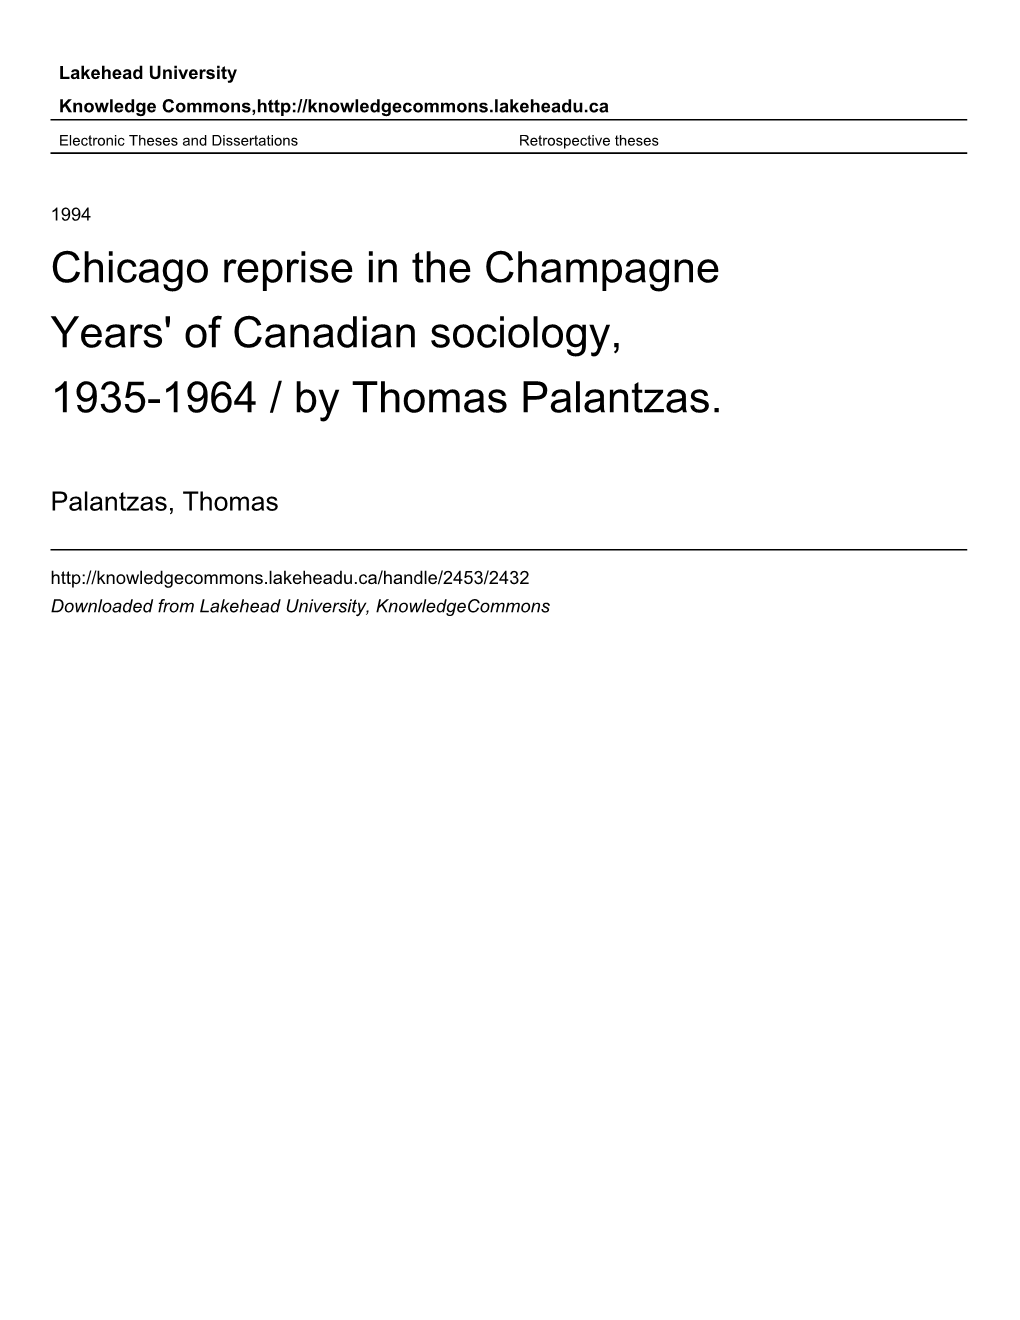 Chicago Reprise in the Champagne Years' of Canadian Sociology, 1935-1964 / by Thomas Palantzas